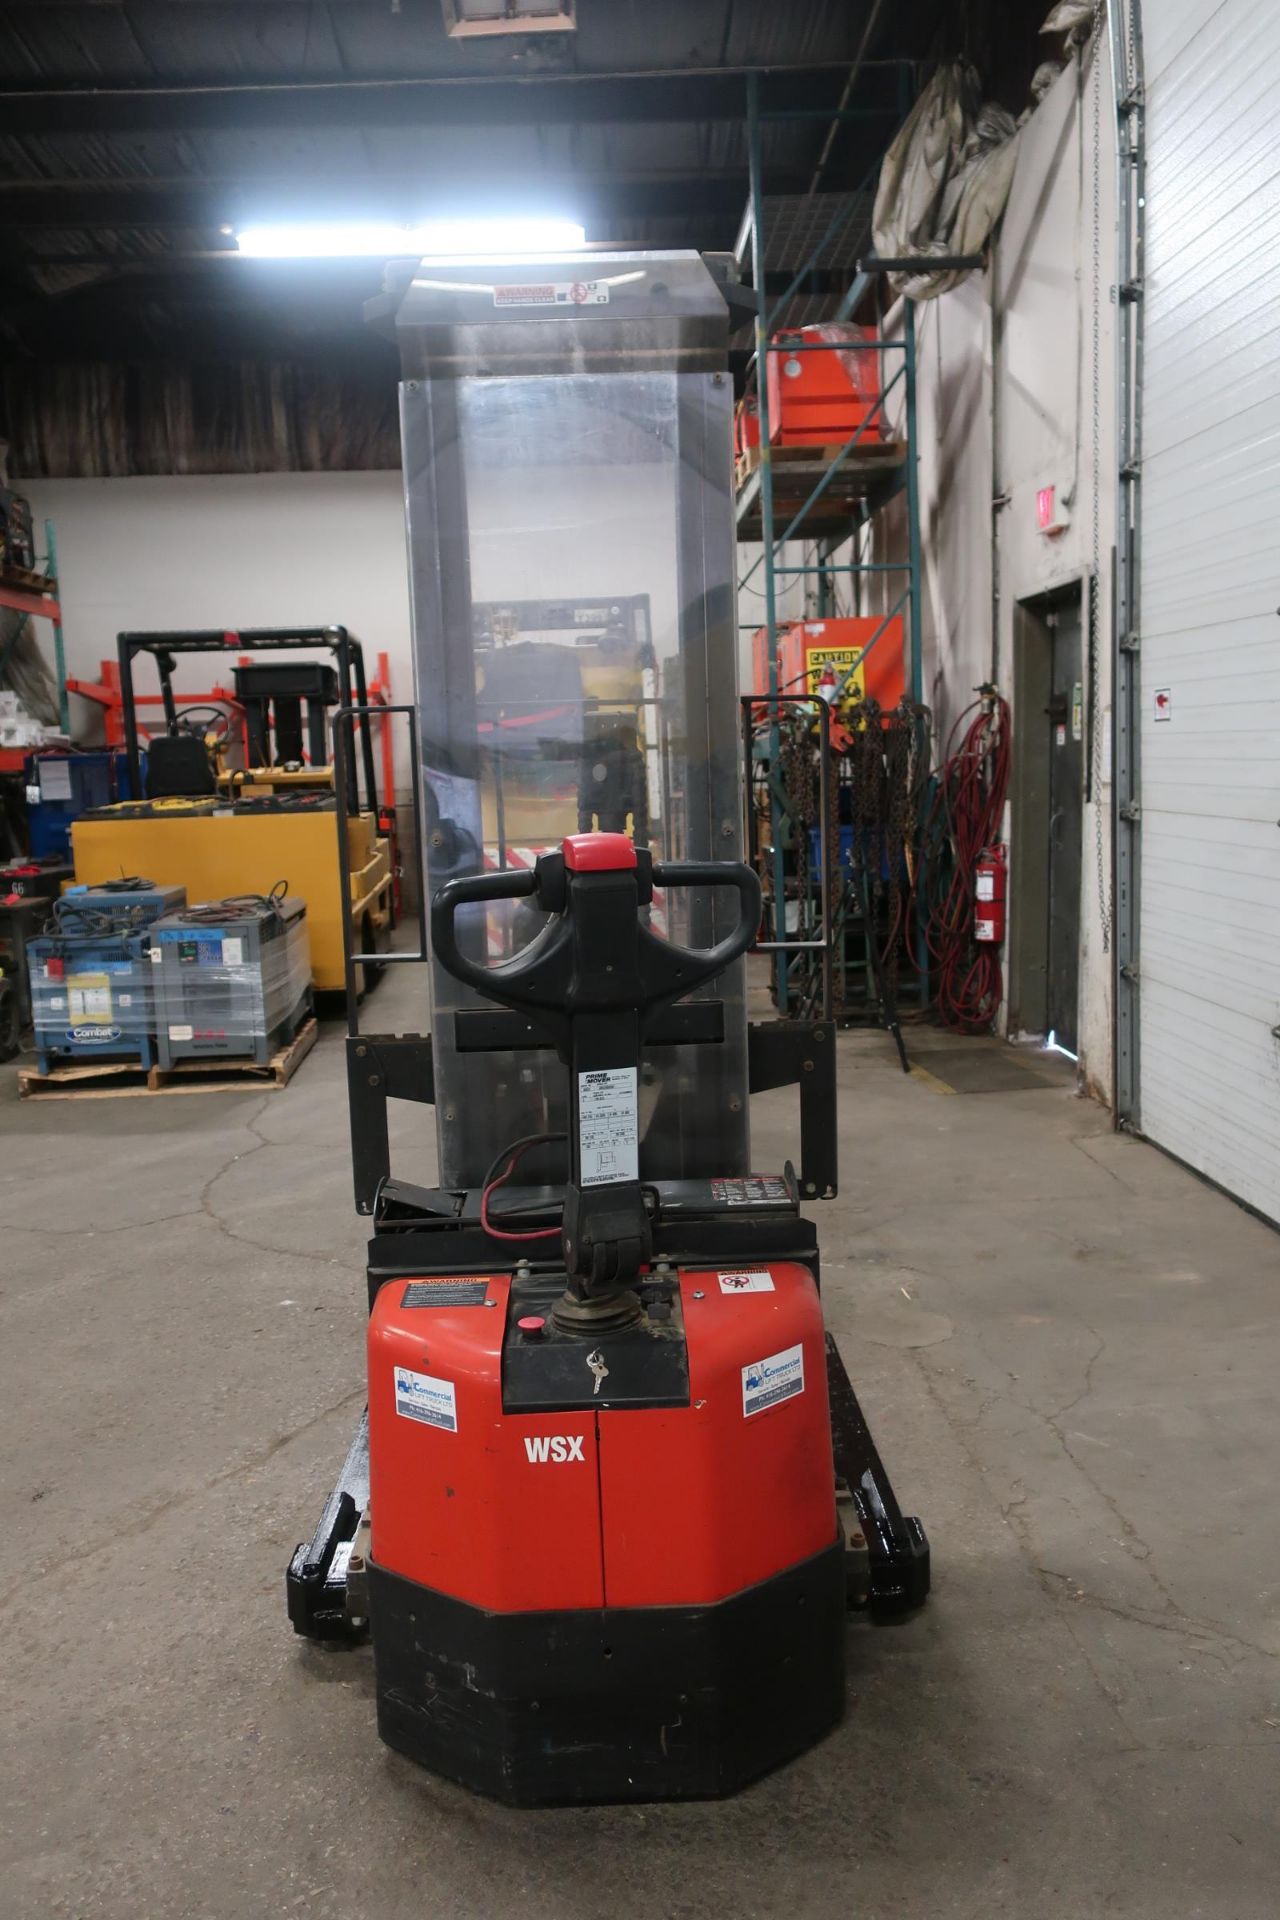 Prime Mover Walk Behind Powered Pallet Cart Walkie Lift unit 1600lbs capacity 2 stage - Image 3 of 3